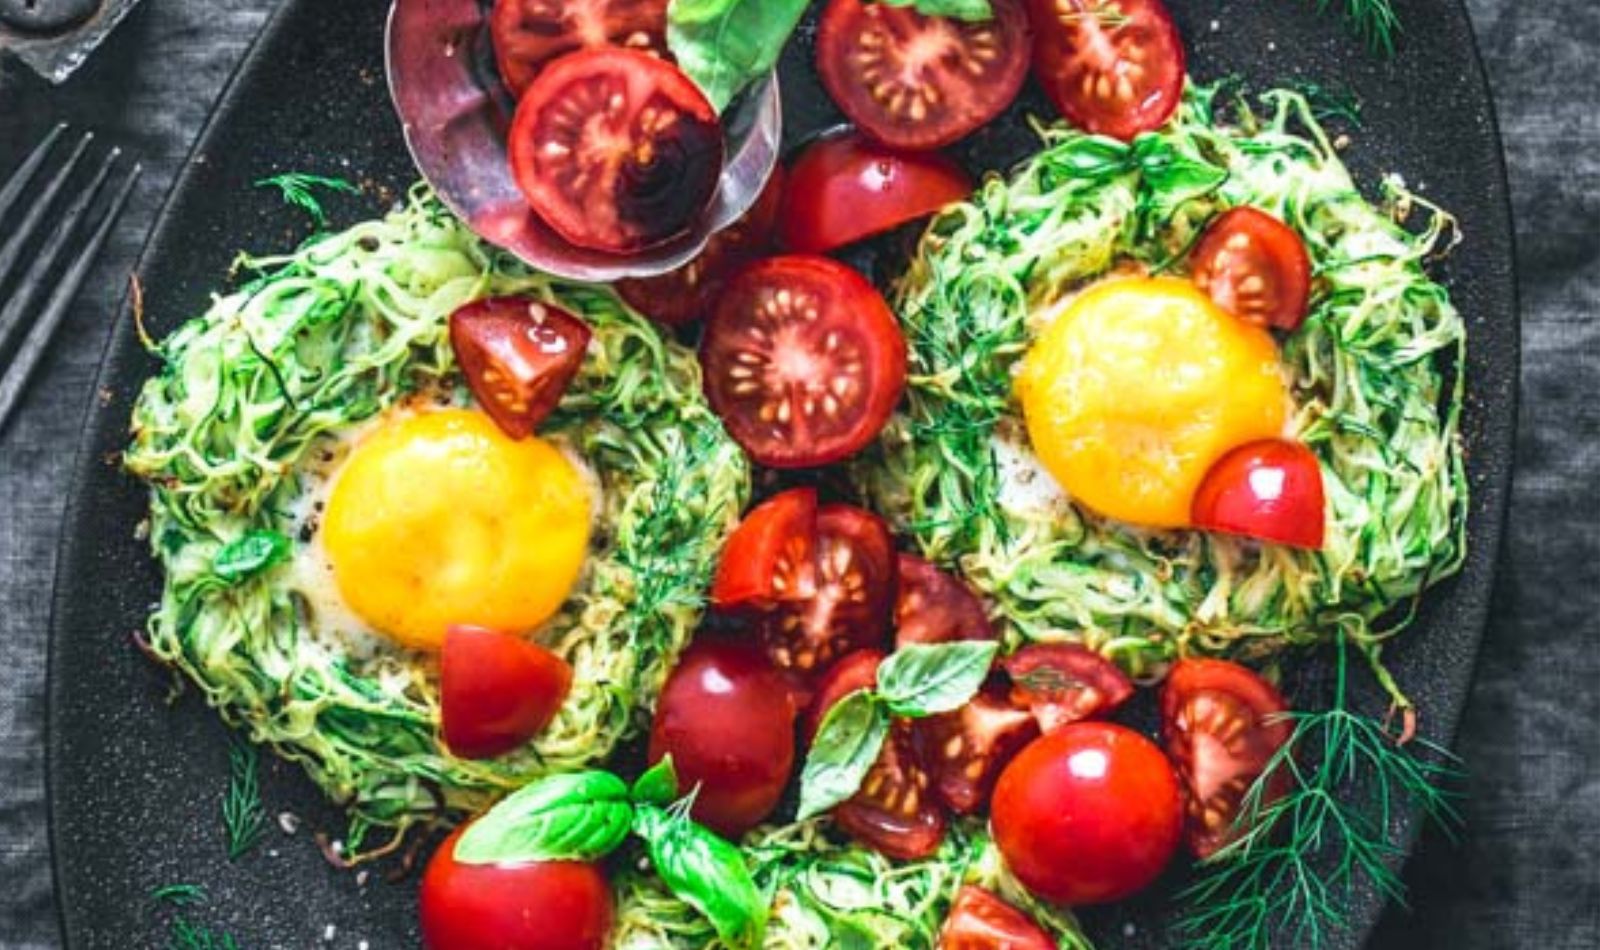 Image of zucchini egg nests made of spiralized zucchii with egg on top and garnished with sliced tomatoes and herb.